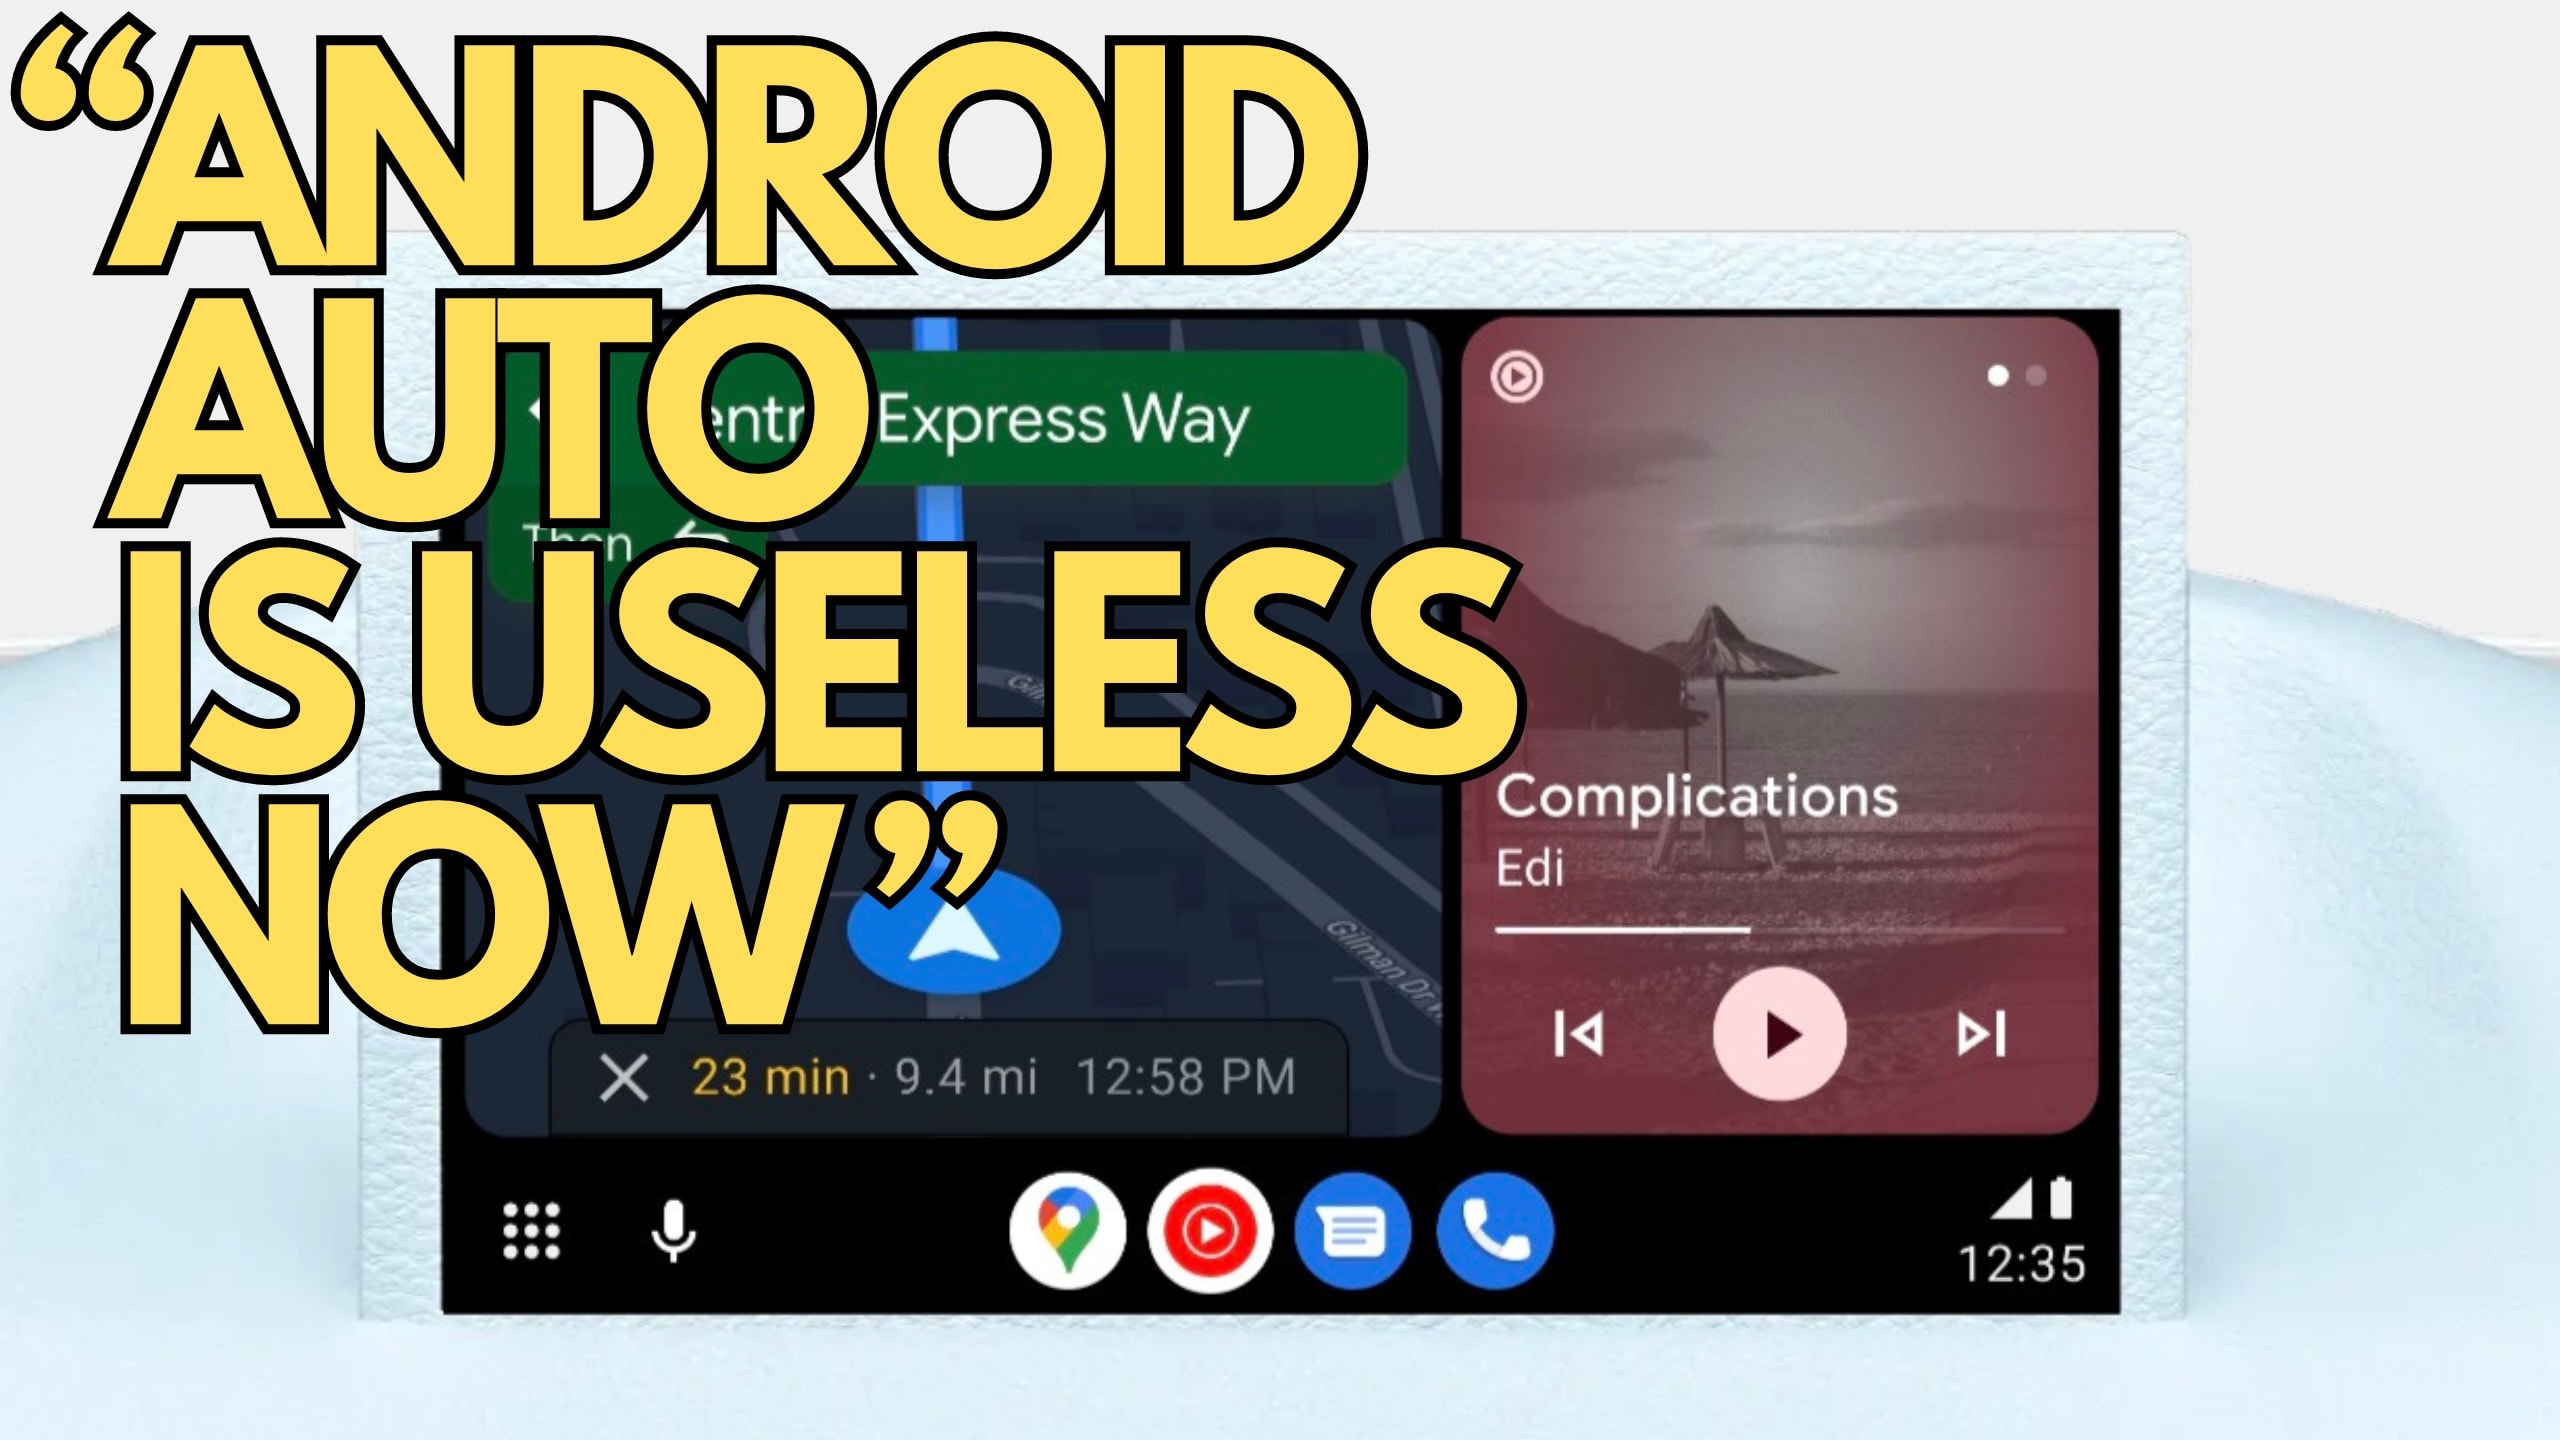 Android Auto Can’t Understand What Users Say, “App Now Completely Useless”